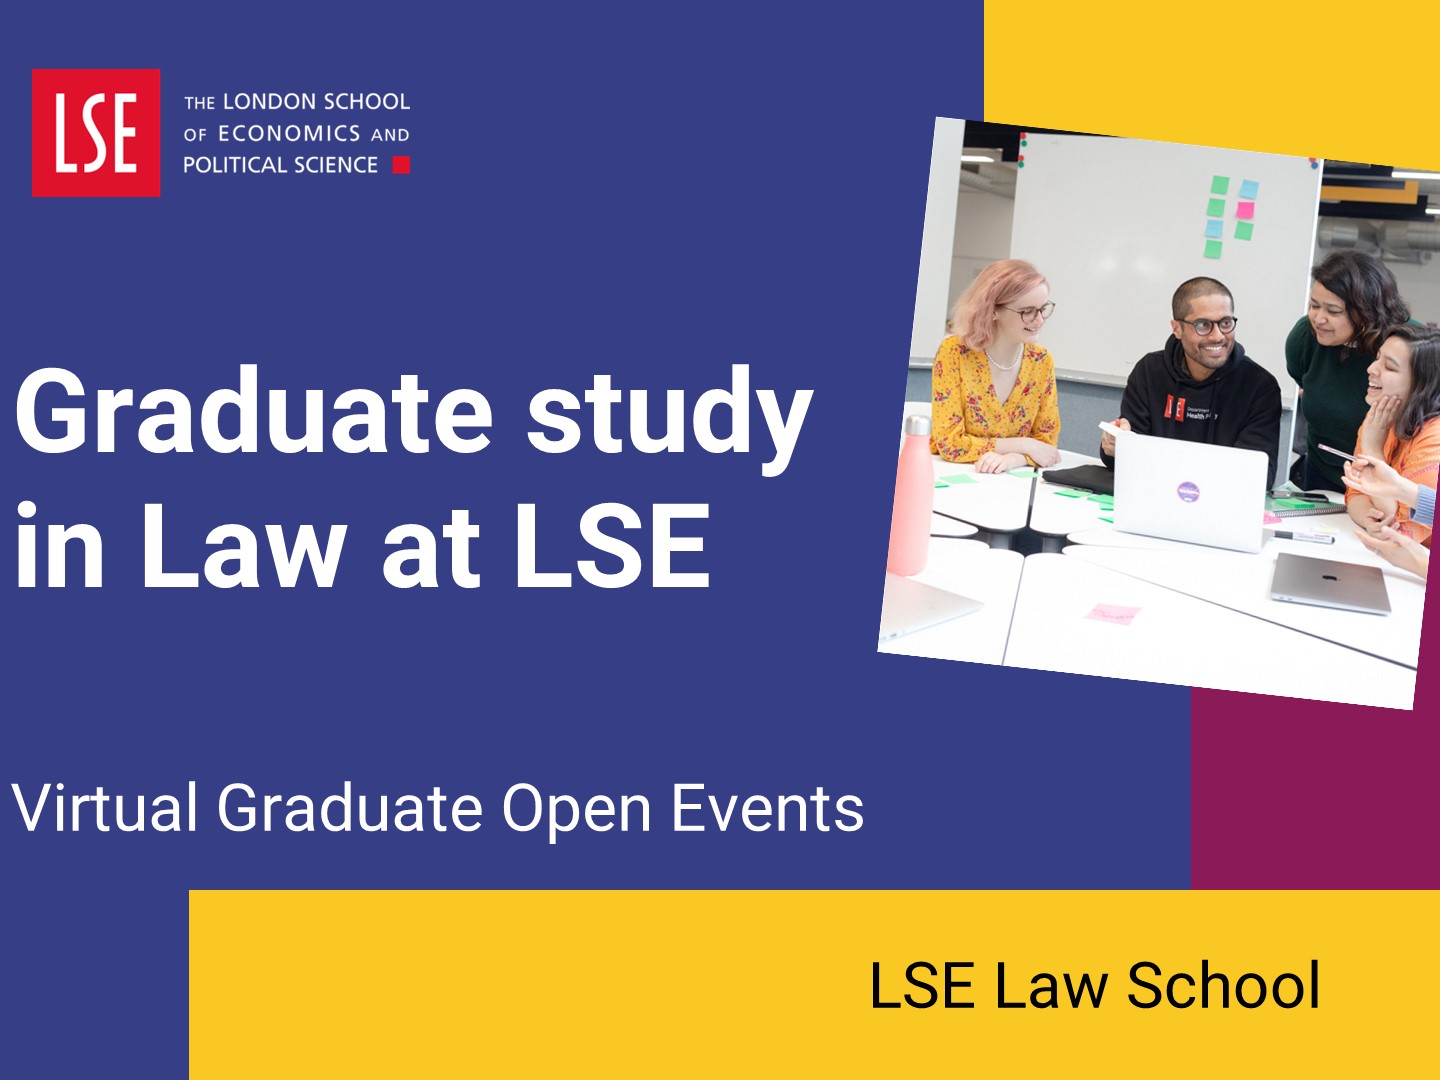 Introduction to Graduate study at LSE Law School